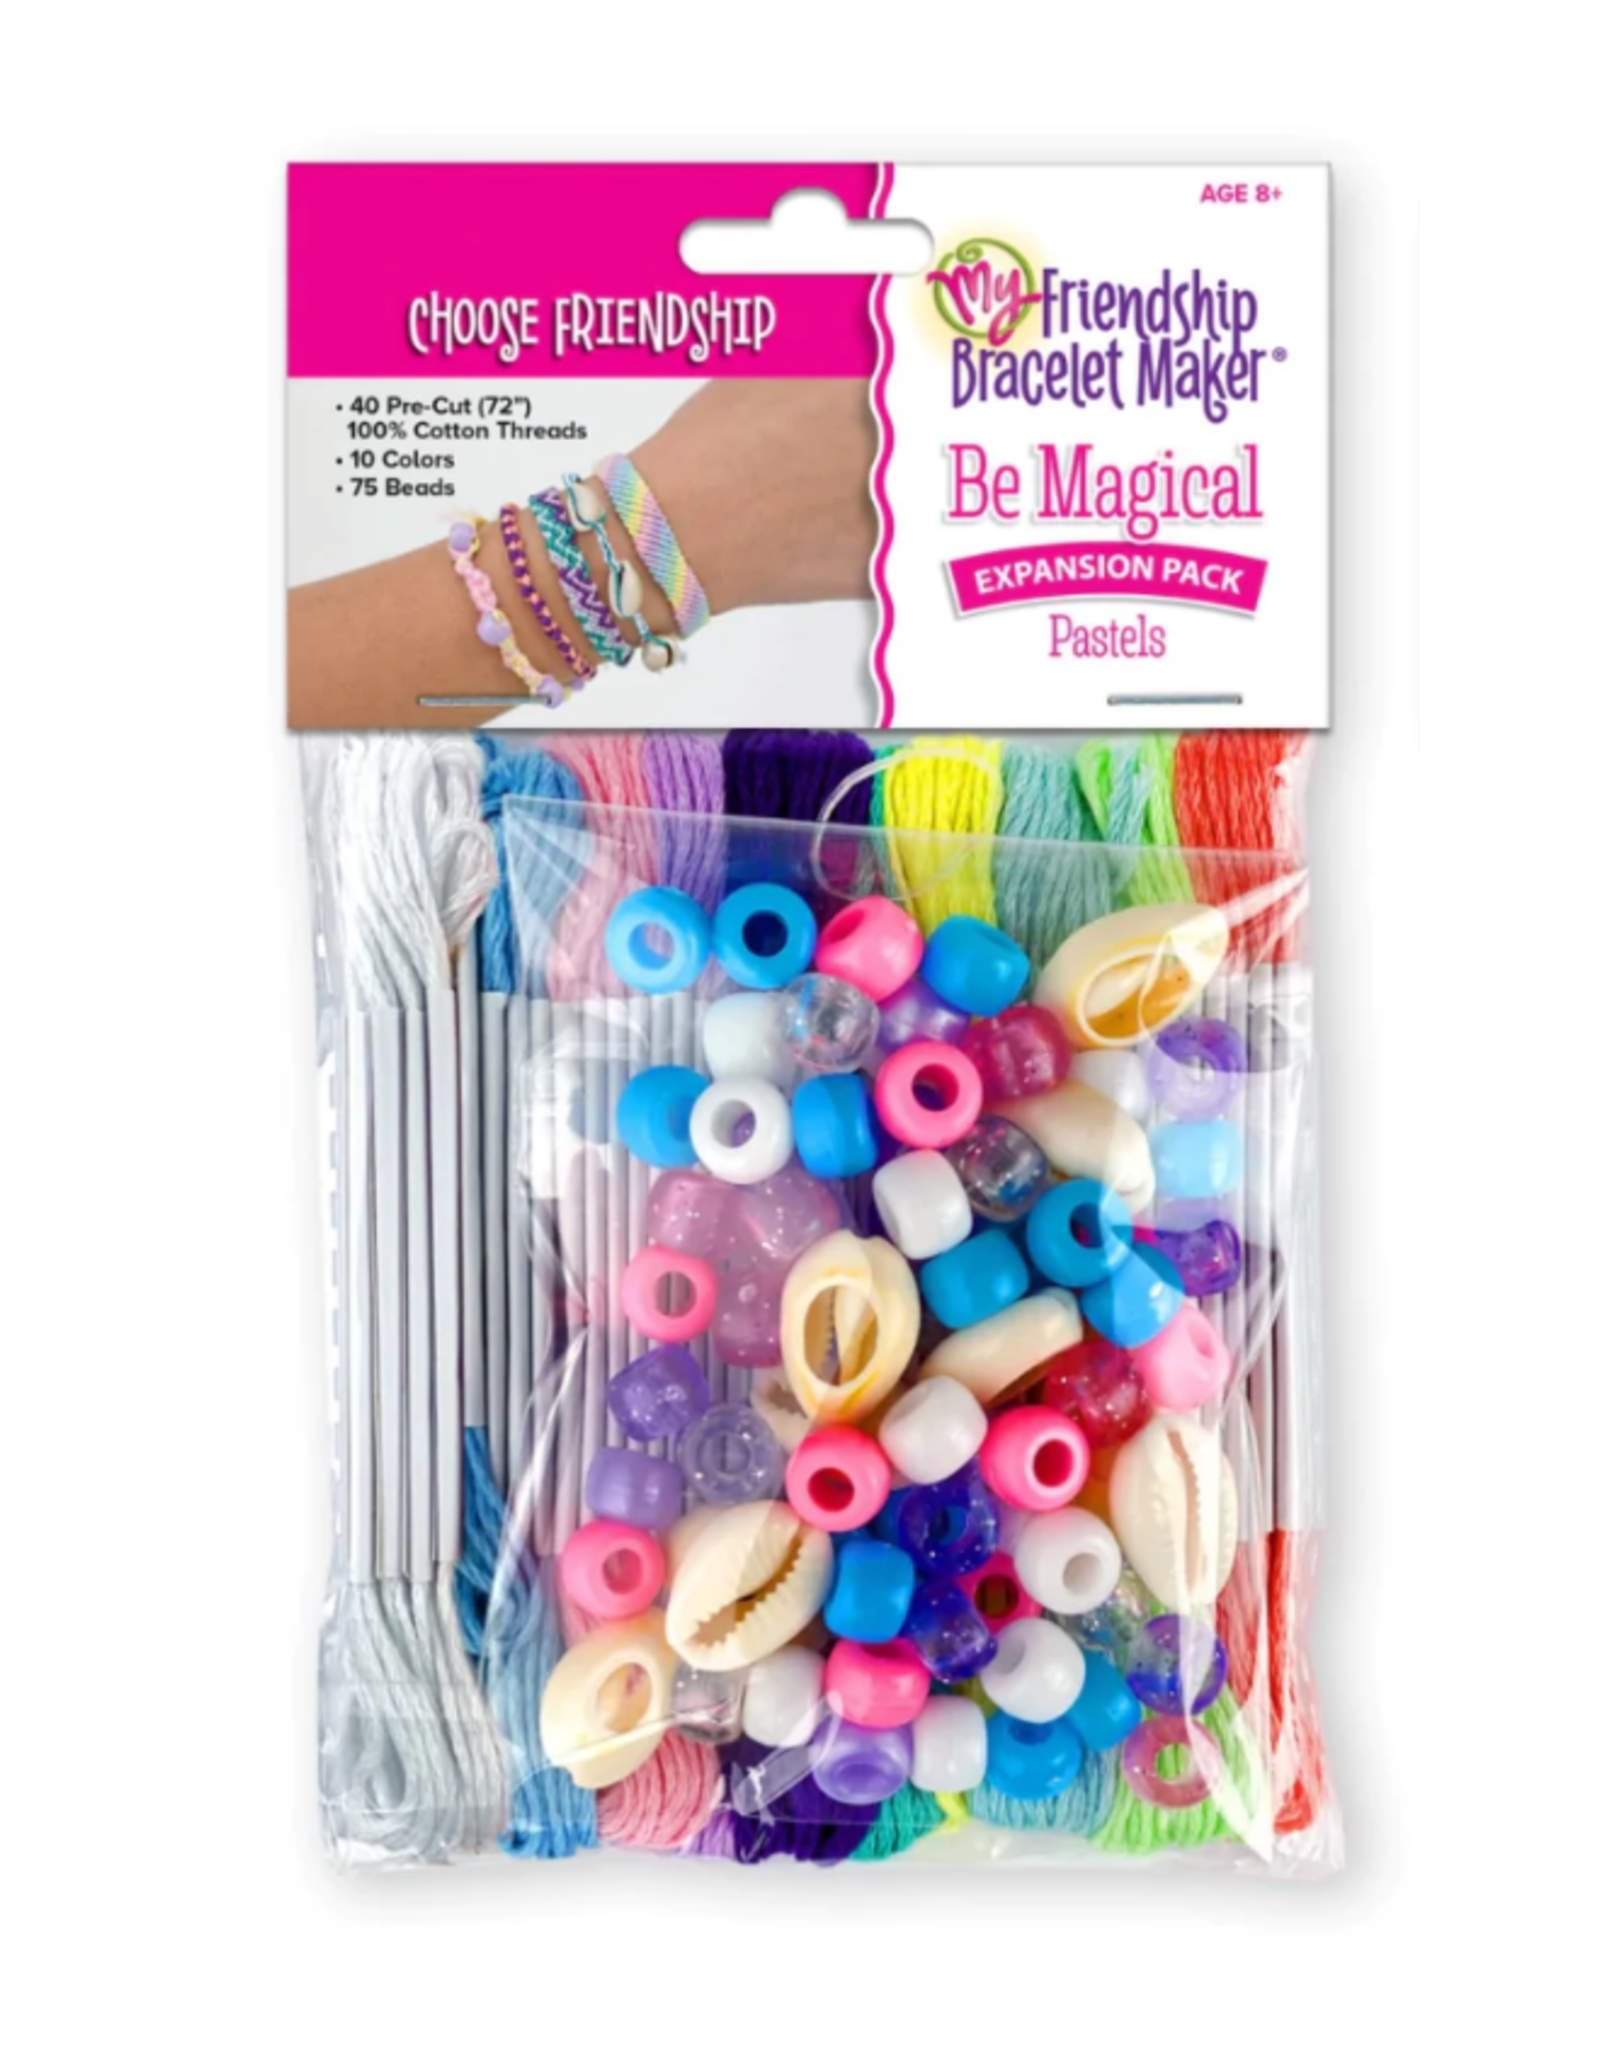 My Friendship Bracelet Maker Expansion Pack: Be Magical - Wit & Whimsy Toys